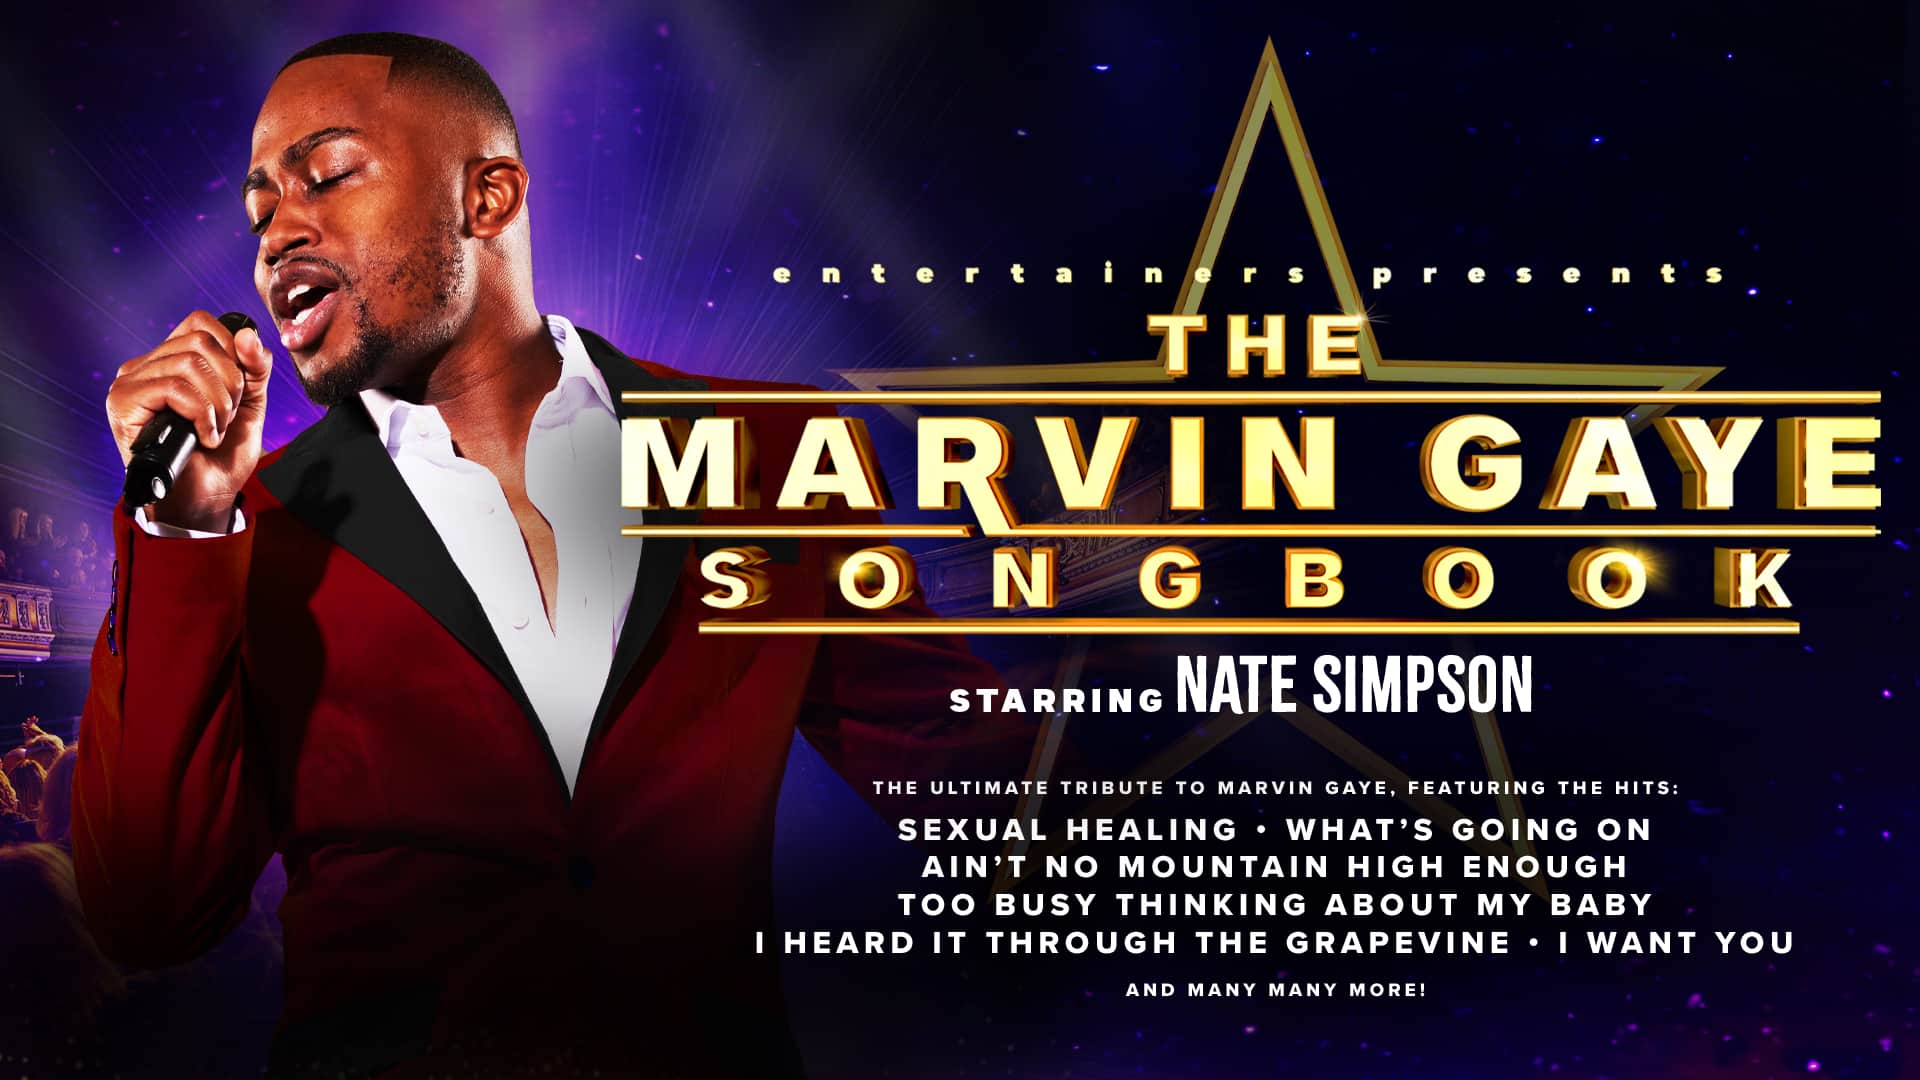 The Marvin Gaye Songbook artwork. Dark purple background. (Left) A young black man wearing a red tuxedo over a white shirt sings into a microphone. (Right) Text reads: ‘entertainers presents. The Marvin Gaye Songbook. Starring Nate Simpson. The Ultimate Tribute to Marvin Gaye, featuring the hits: Sexual healing; What’s Going on; Ain’t No Mountain High Enough; Too Busy Thinking About My Baby; I Heard It Through The Grapevine; I Want You. And many many more!’ Behind the words ‘The Marvin Gaye Songbook’, a large, golden outline of a five-pointed star shape.